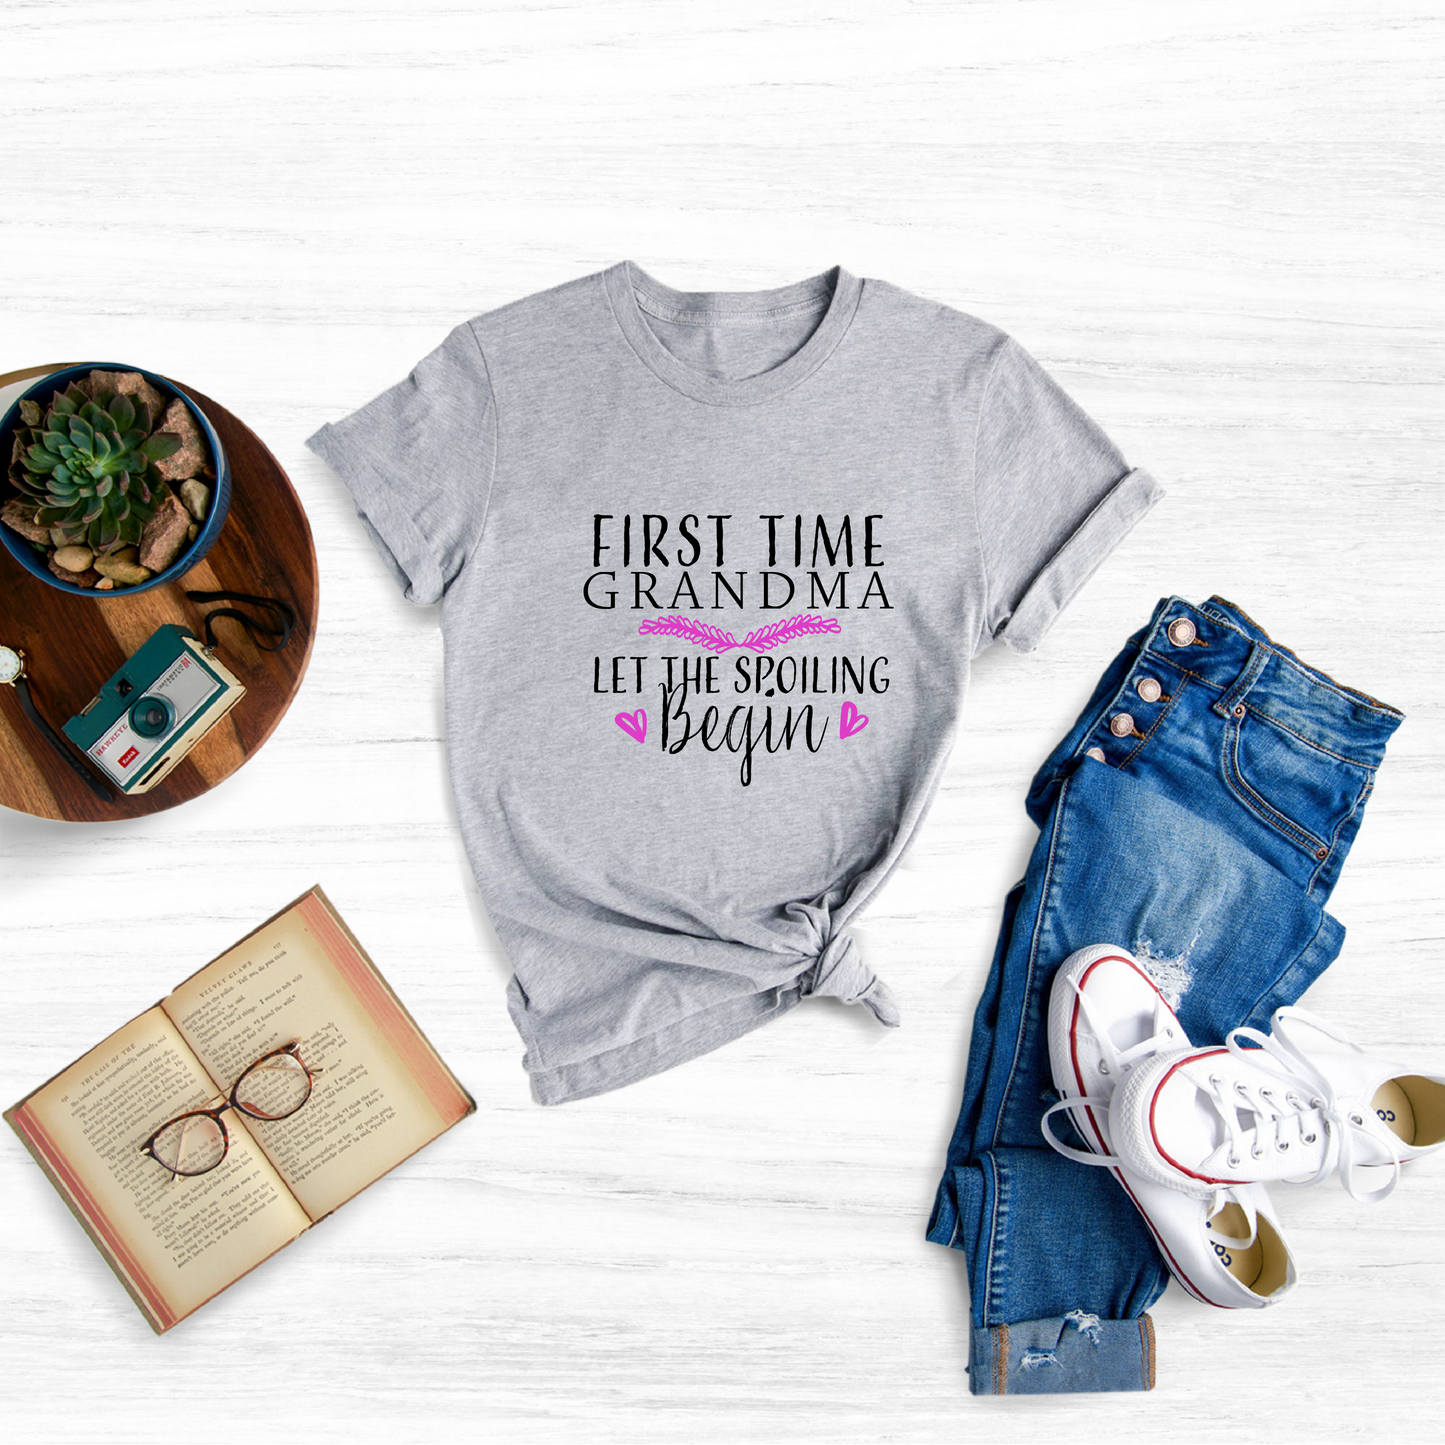 "Celebrate the joys of grandparenthood with this 'First Time Grandma' tee."